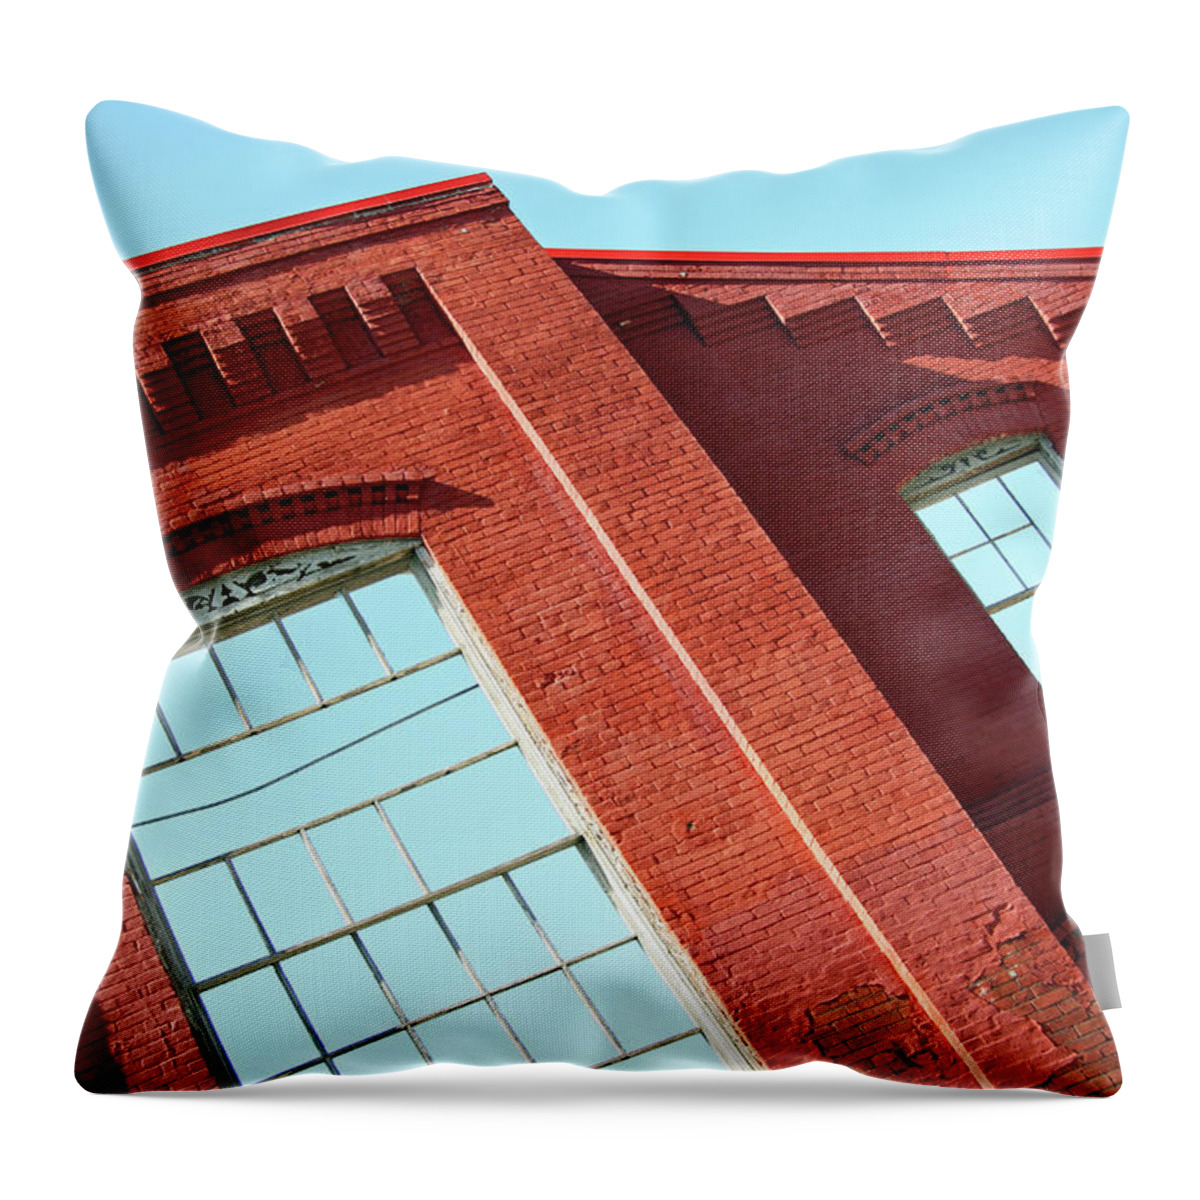 Brick Throw Pillow featuring the photograph Bricks And Blue by Cora Wandel